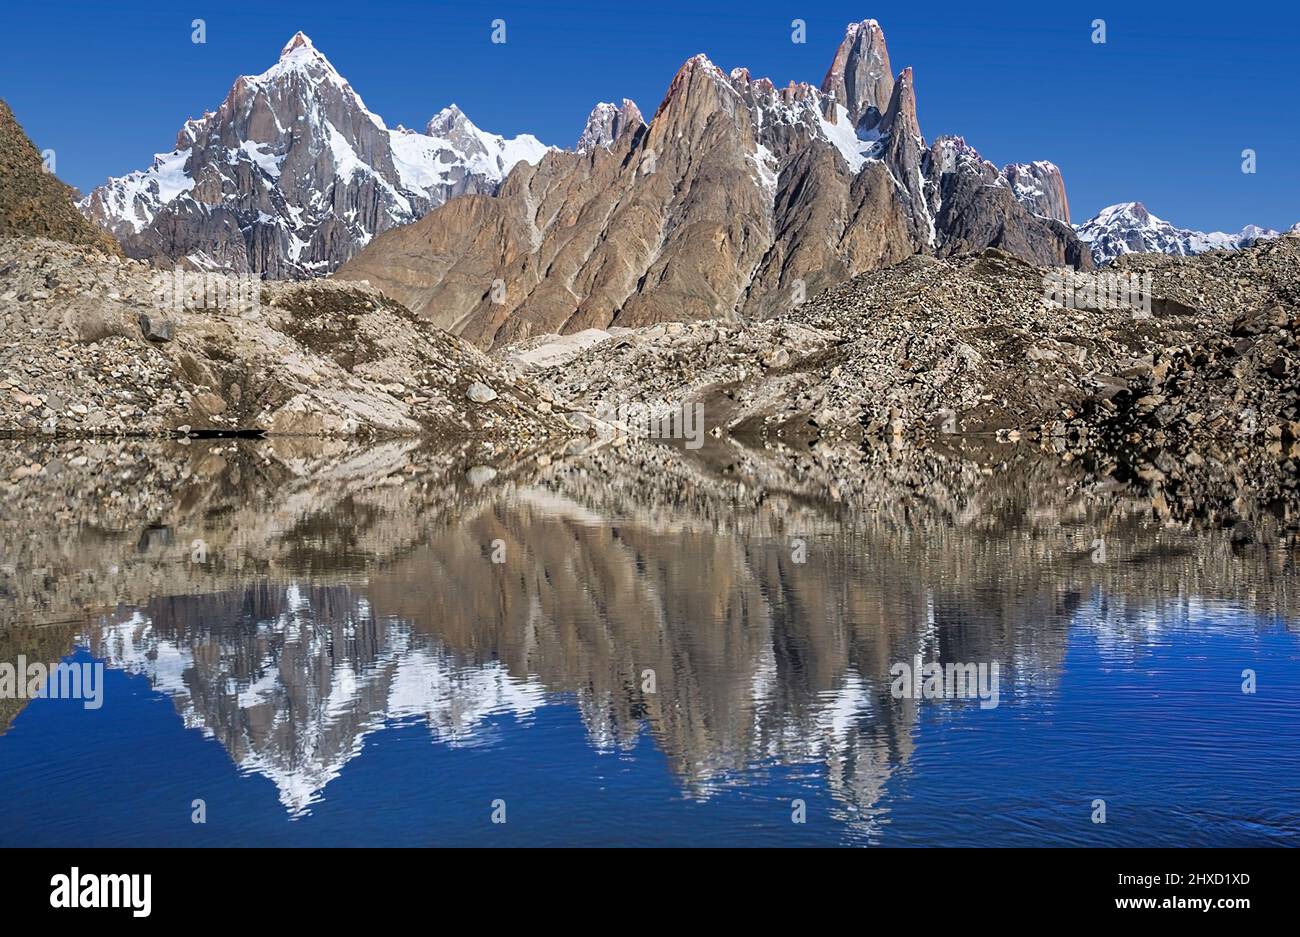 The beautiful Paiju Peak, or Paiyu Peak, 6,610 m high stands near the Trango Towers, which are a group of rock towers that stand in Gilgit-Baltistan. Stock Photo